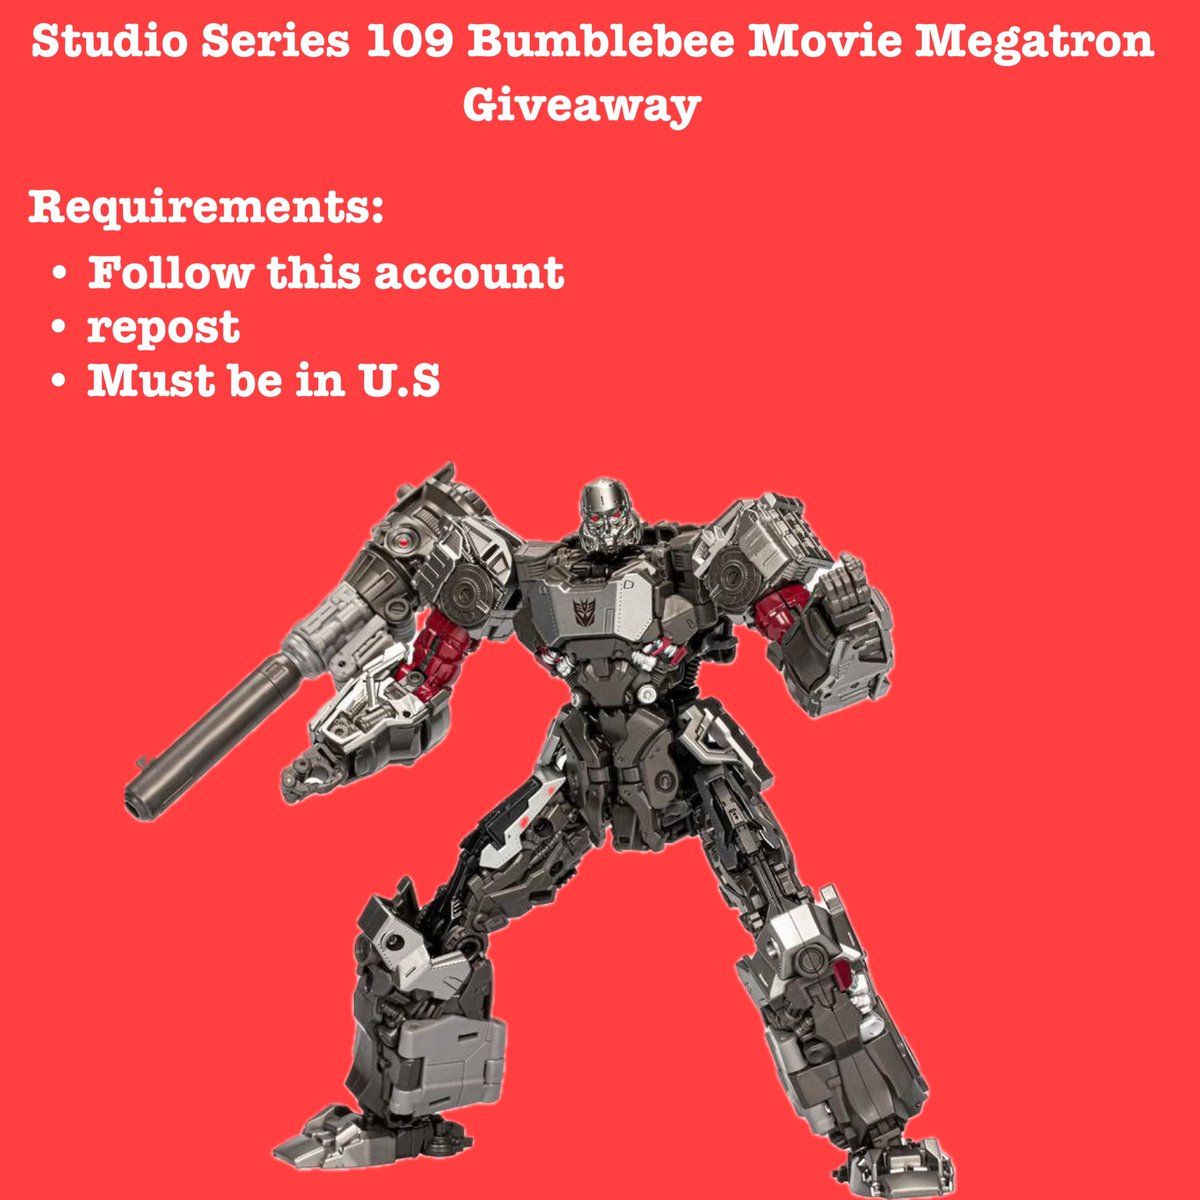 Doing my first ever giveaway and it’s Megatron! The requirements to join is that you must follow this account, repost, and be in the U.S. . I’ll probably do a future giveaway across the world next but for now I can only afford shipping in the U.S. Good luck!!!!